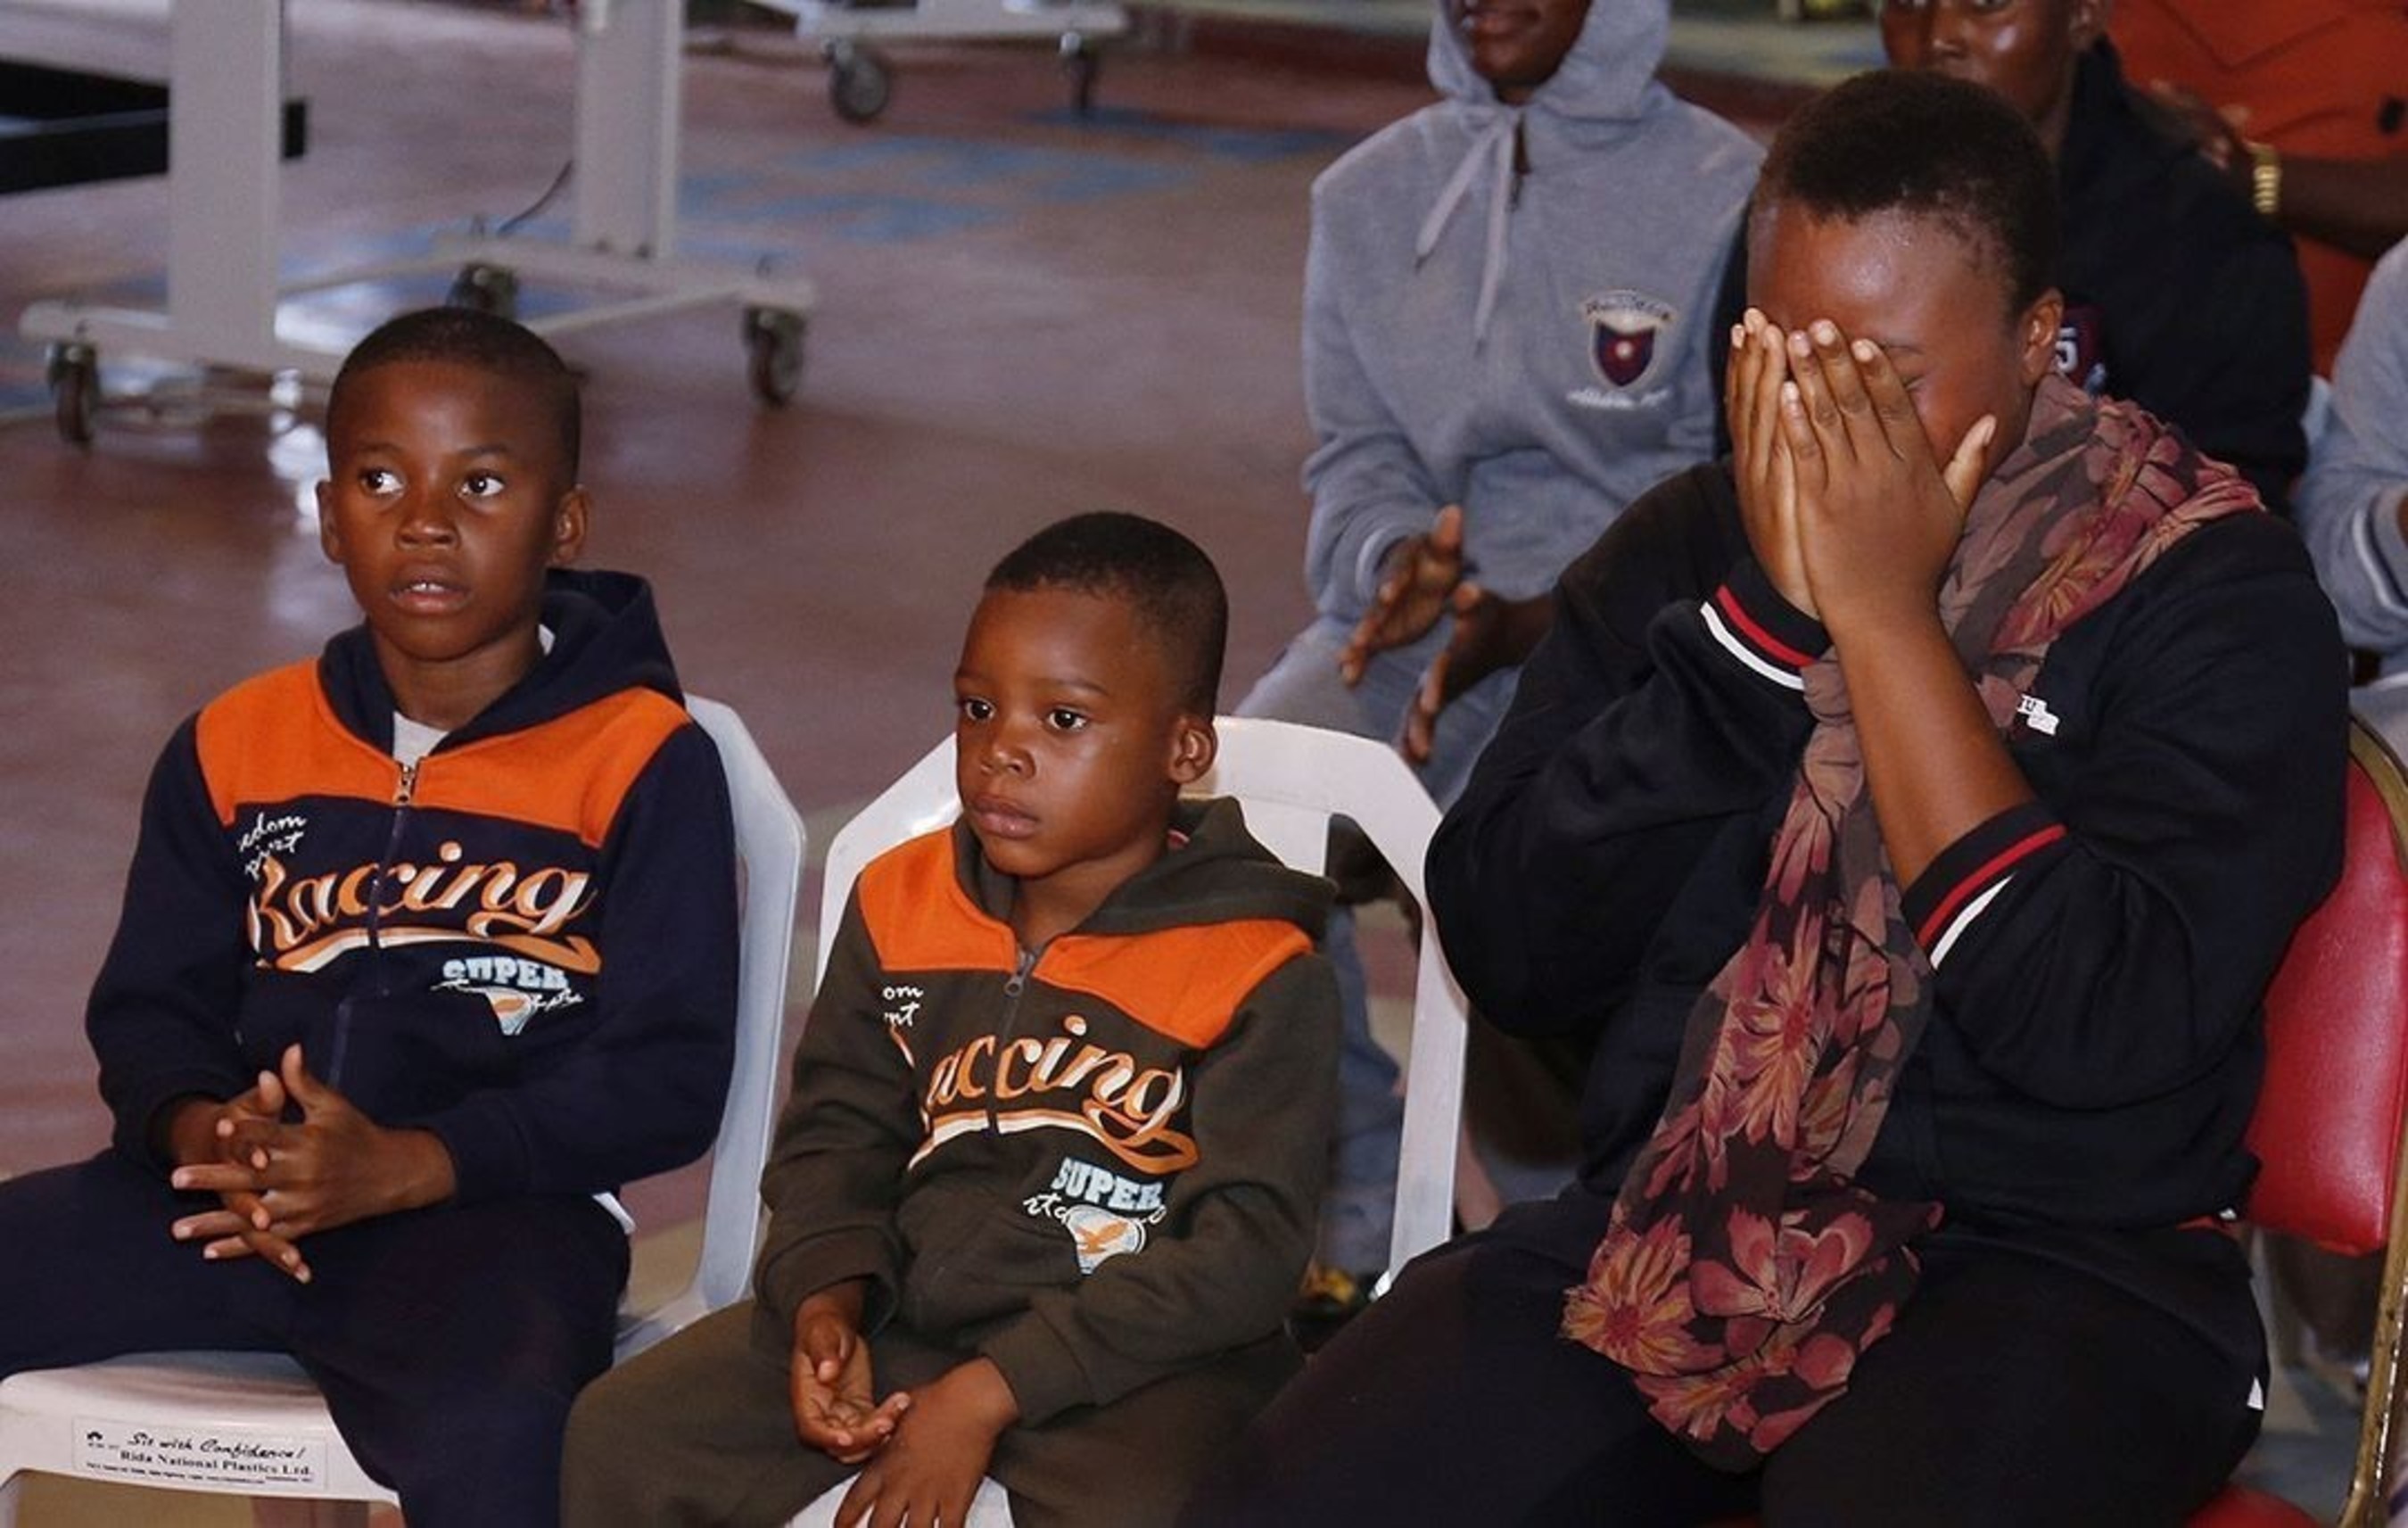 Precious Chioma cries as she recounts the ordeal she passed through with her two sons in their attempt to illegally travel to Europe from Nigeria. She sold all of her possessions to finance the trip but ended up in a Libyan prison after she was caught with her children hiding in suffocating conditions inside a watermelon truck. (PRNewsFoto/Emmanuel TV)